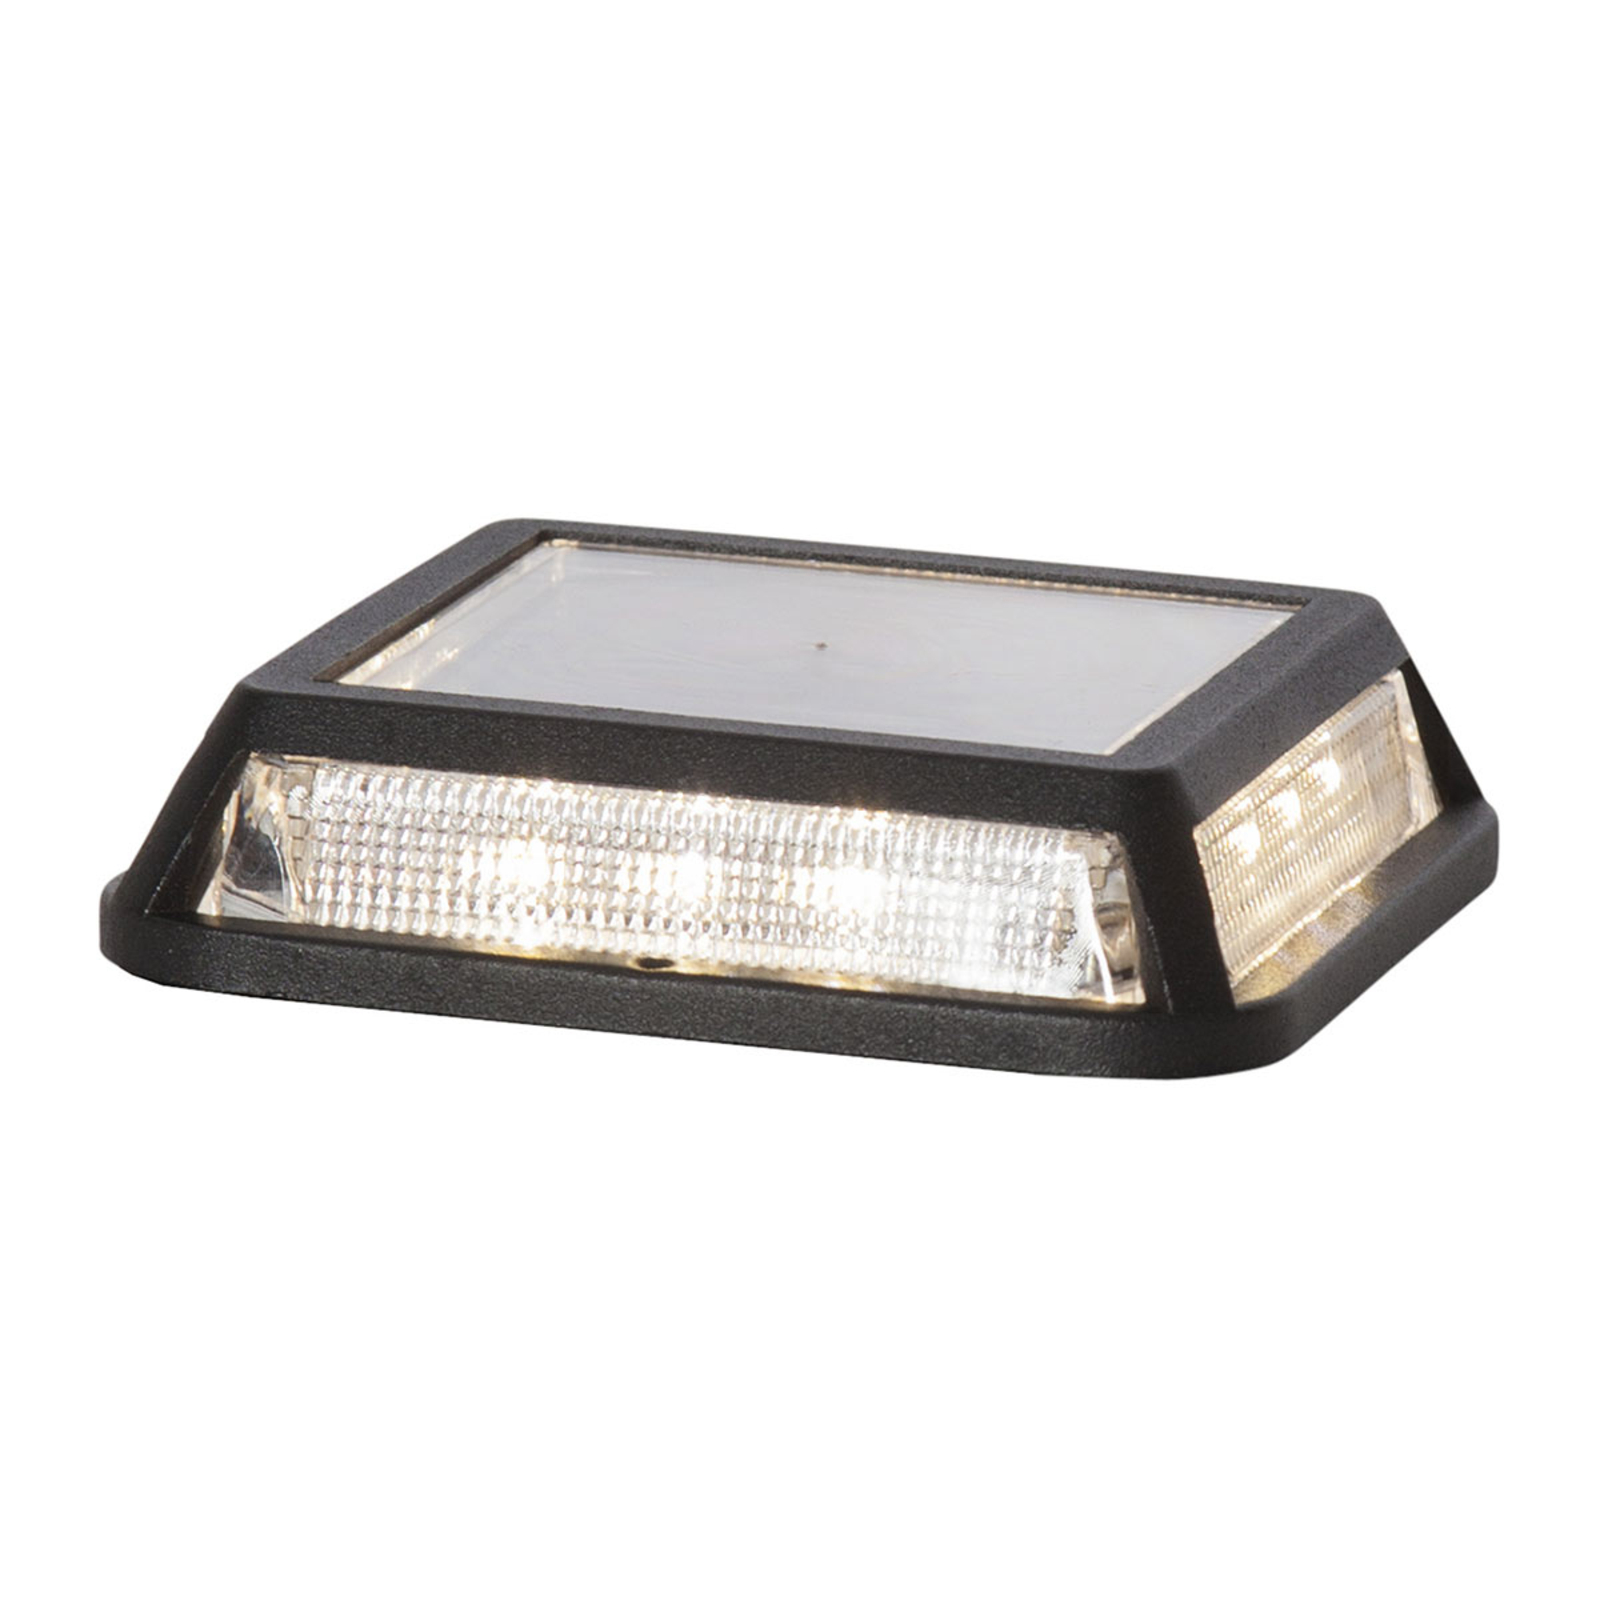 Driveway LED solar light, load of up to 3,000 kg